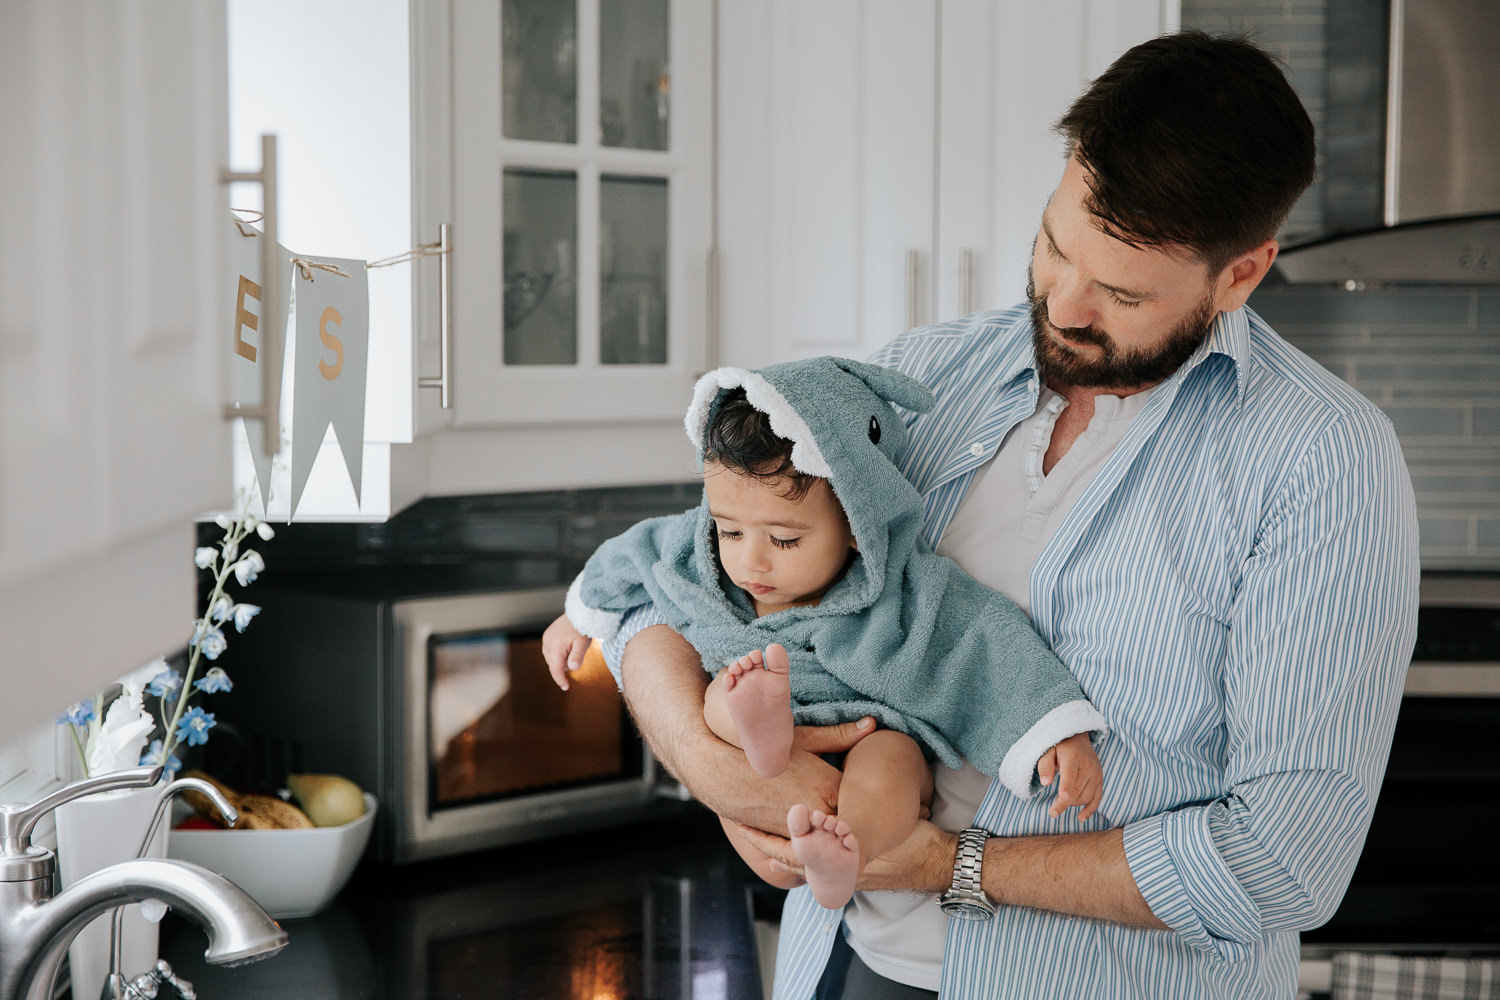 dad standing in kitchen holding 1 year old baby boy fresh out of bath, son wrapped in blue shark hooded towel - York Region Lifestyle Photos